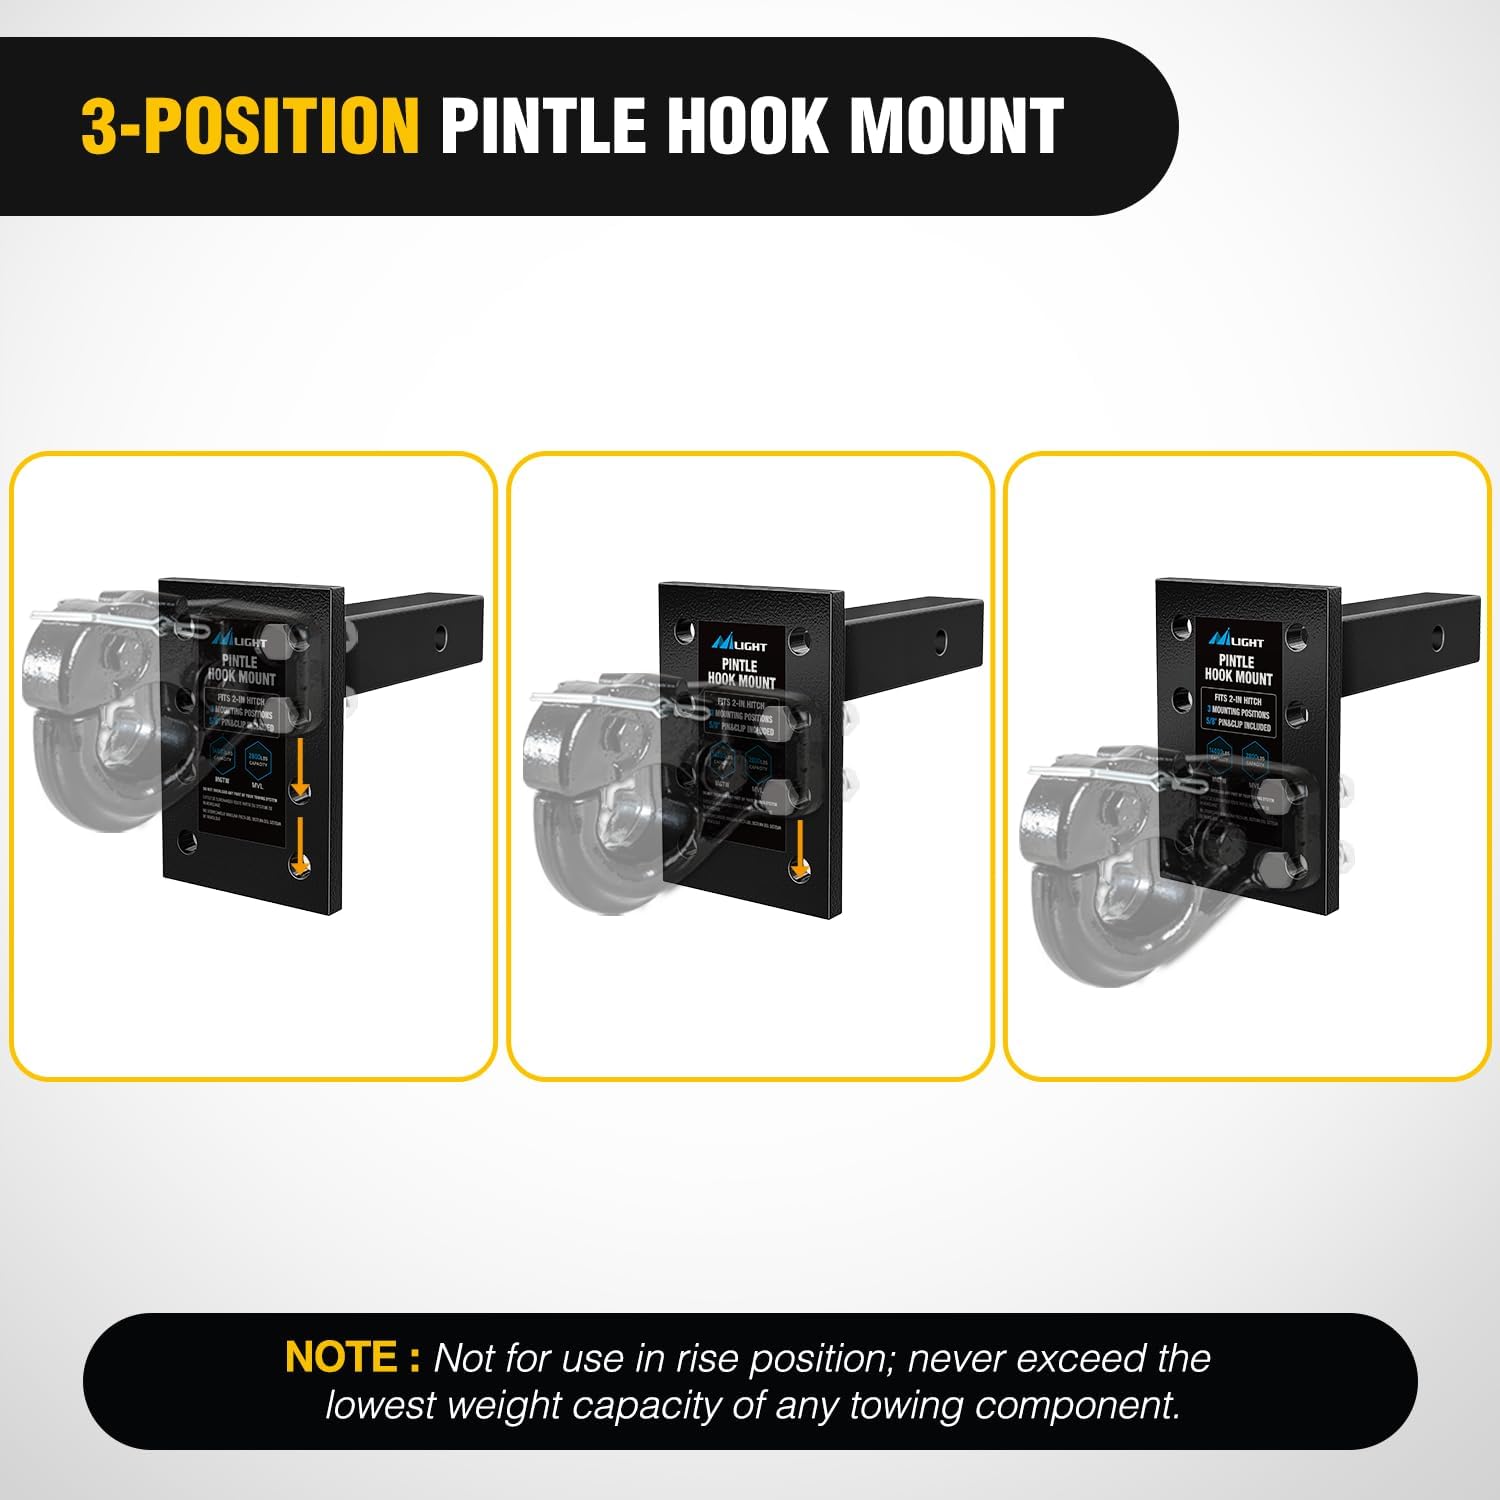 3-Position Pintle Hook Mount for 2" Hitch Receiver Nilight